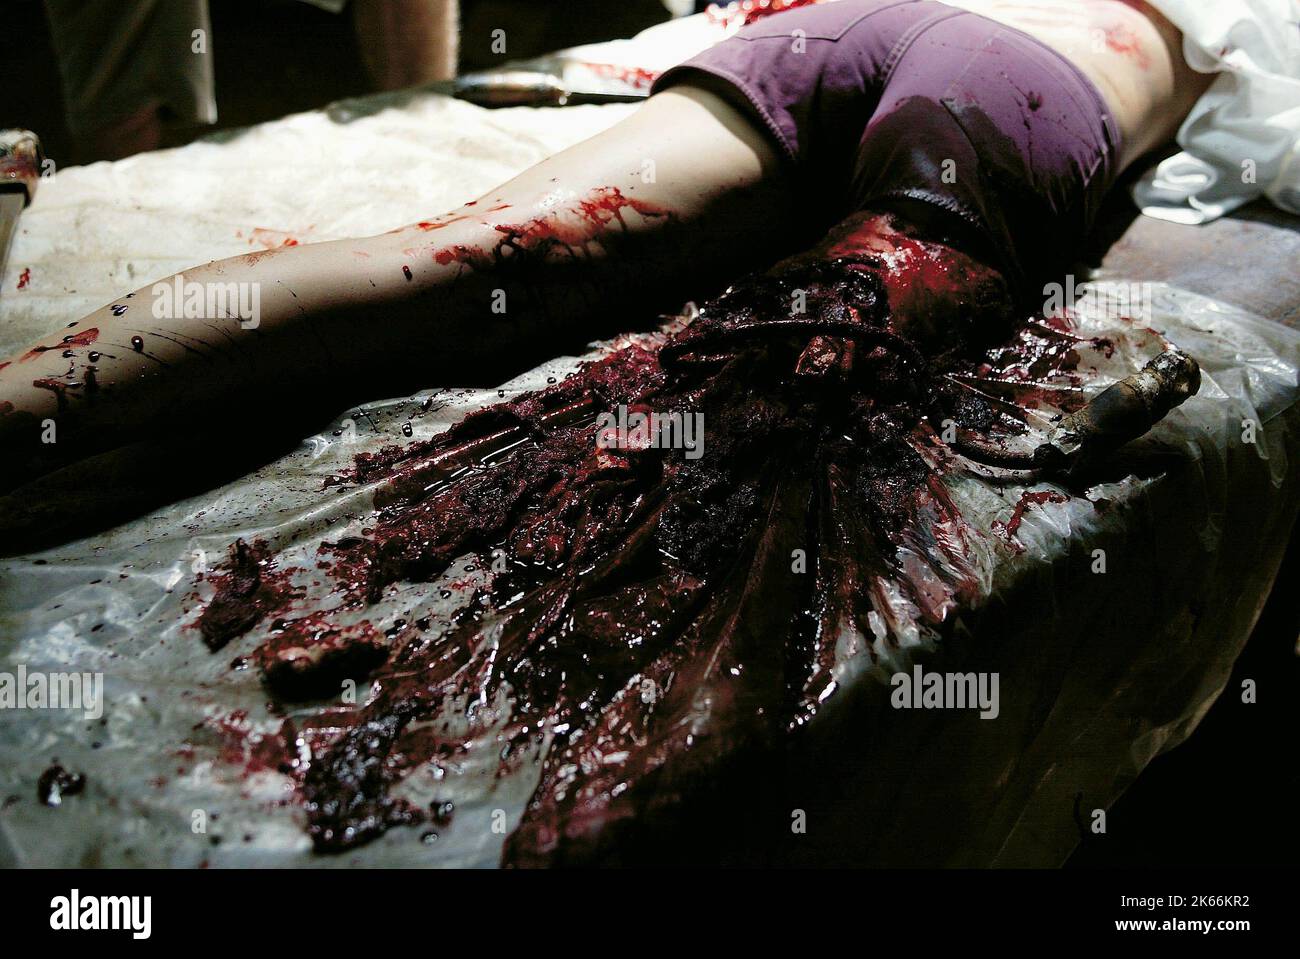 BODY WITH LEG CUT OFF, WRONG TURN, 2003 Stock Photo